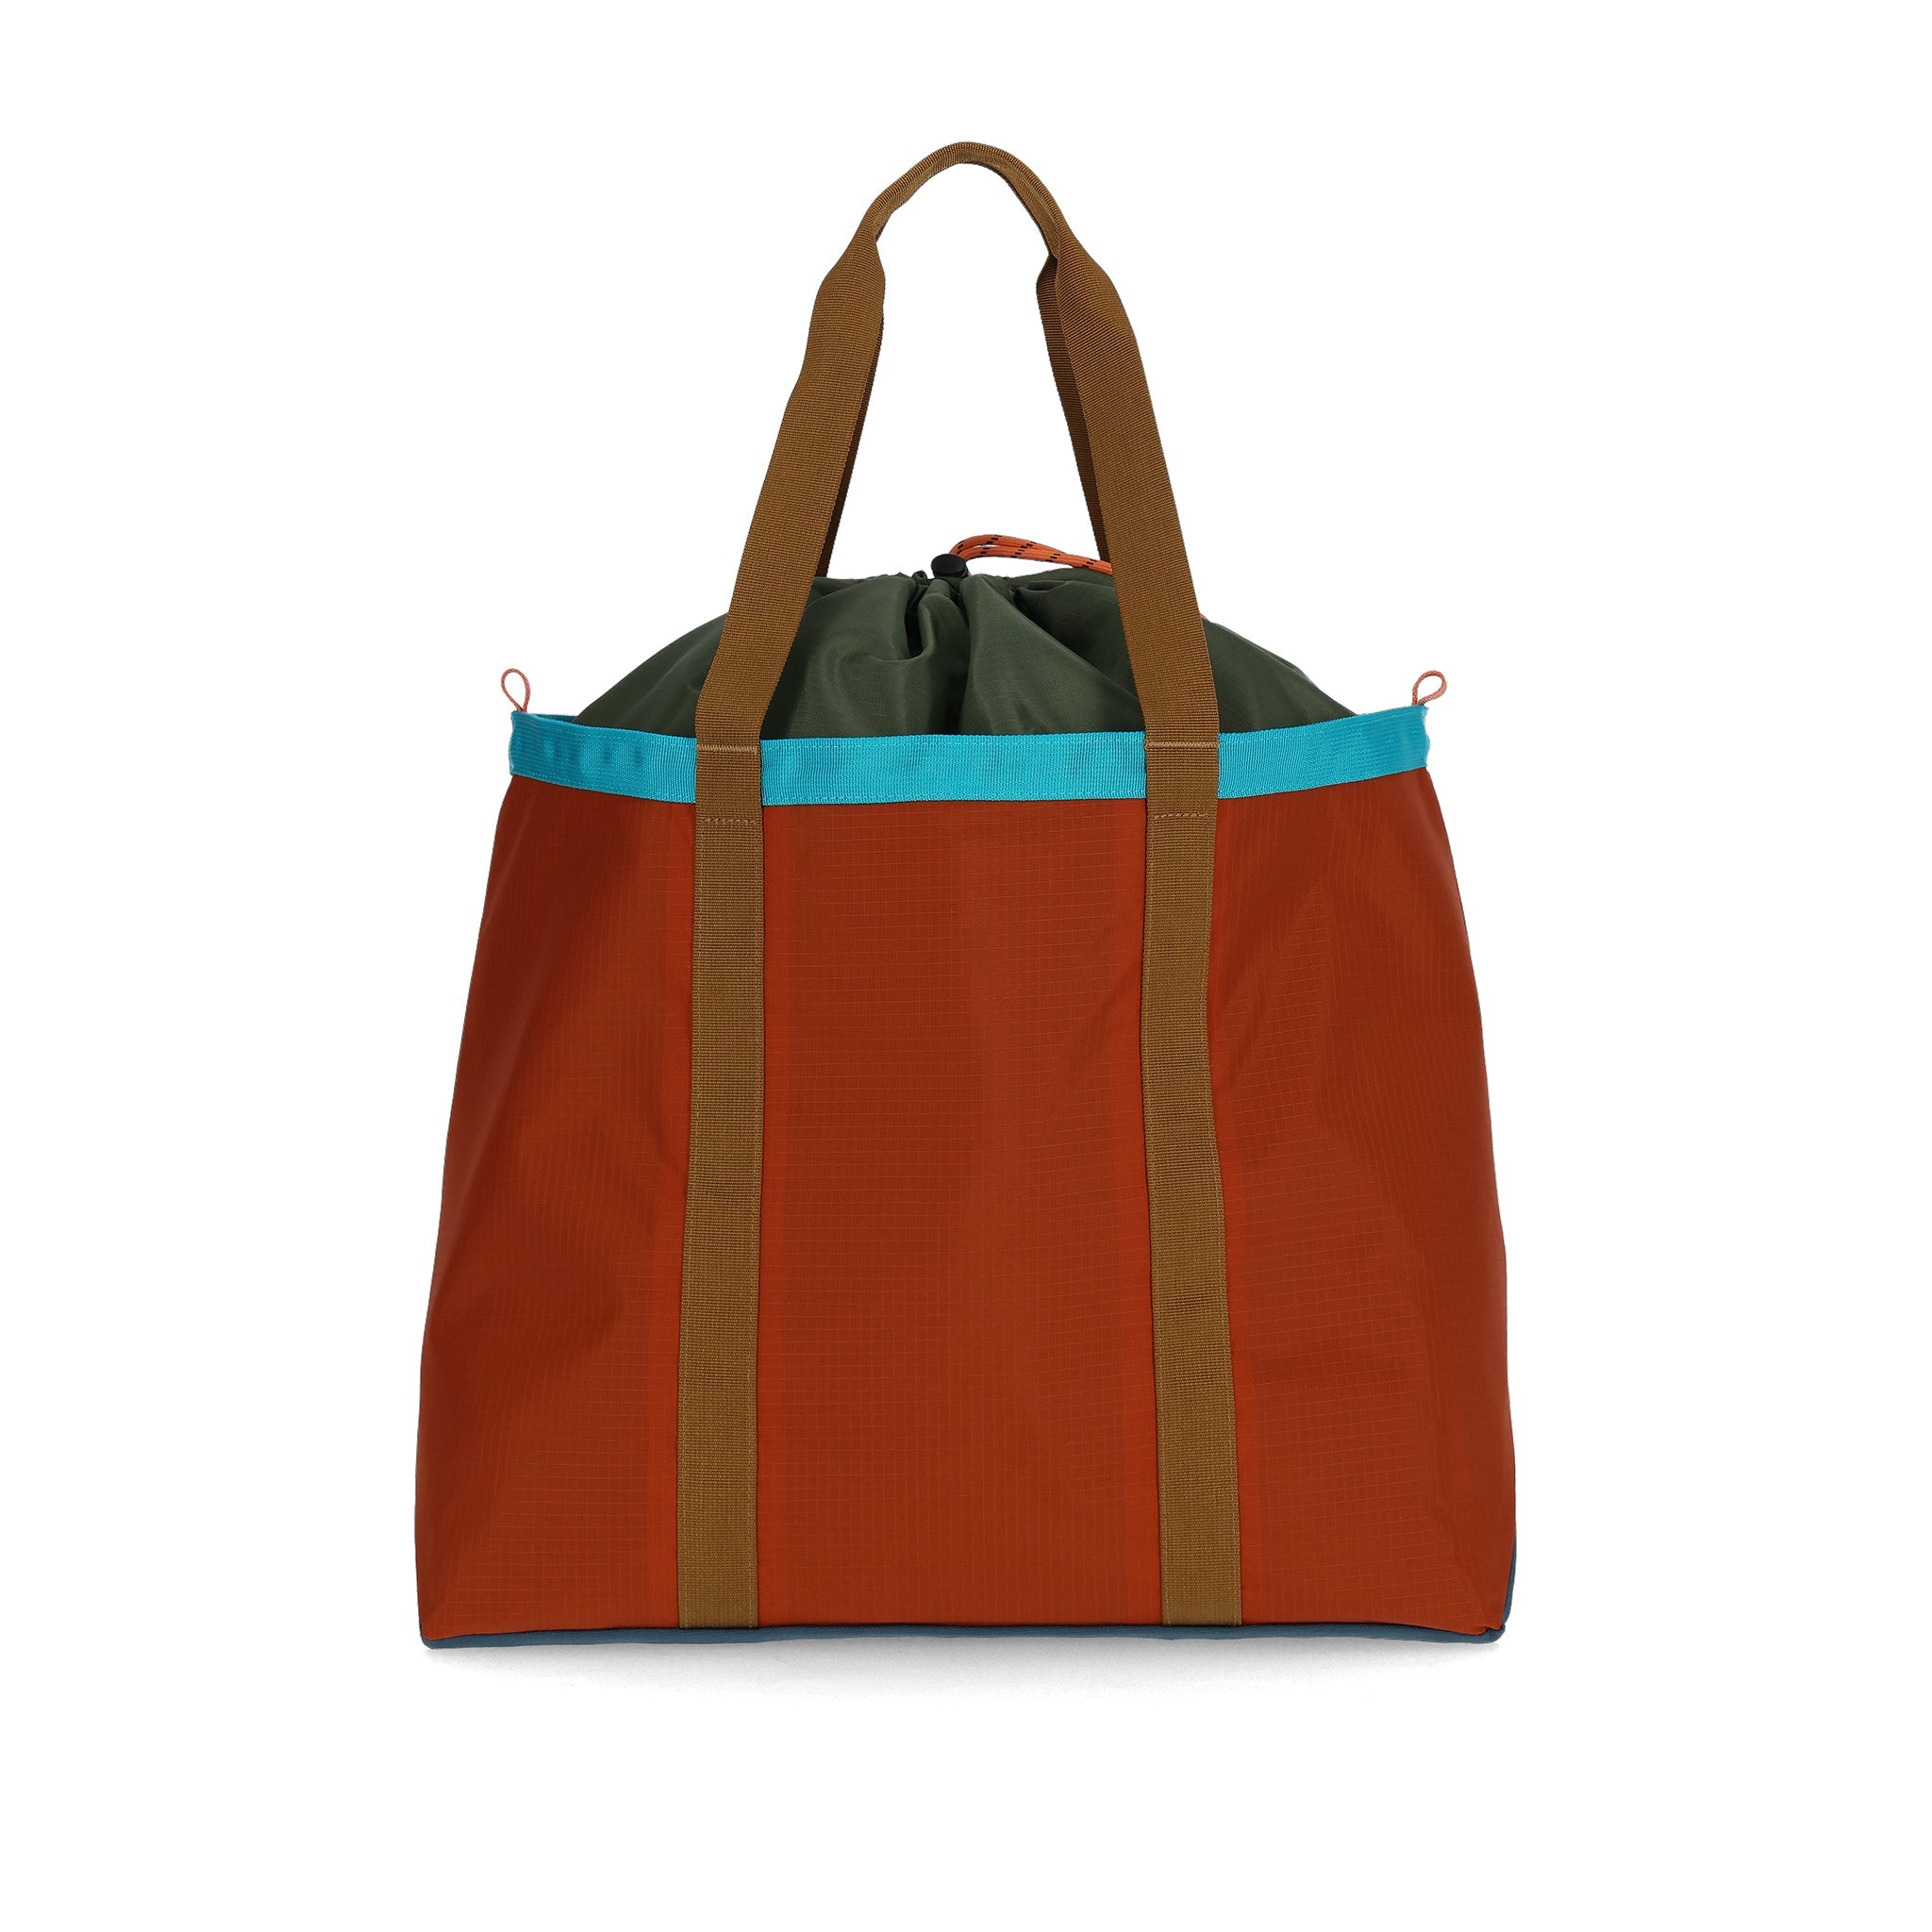 Back View of Topo Designs Mountain Utility Tote in "Clay / Hemp"